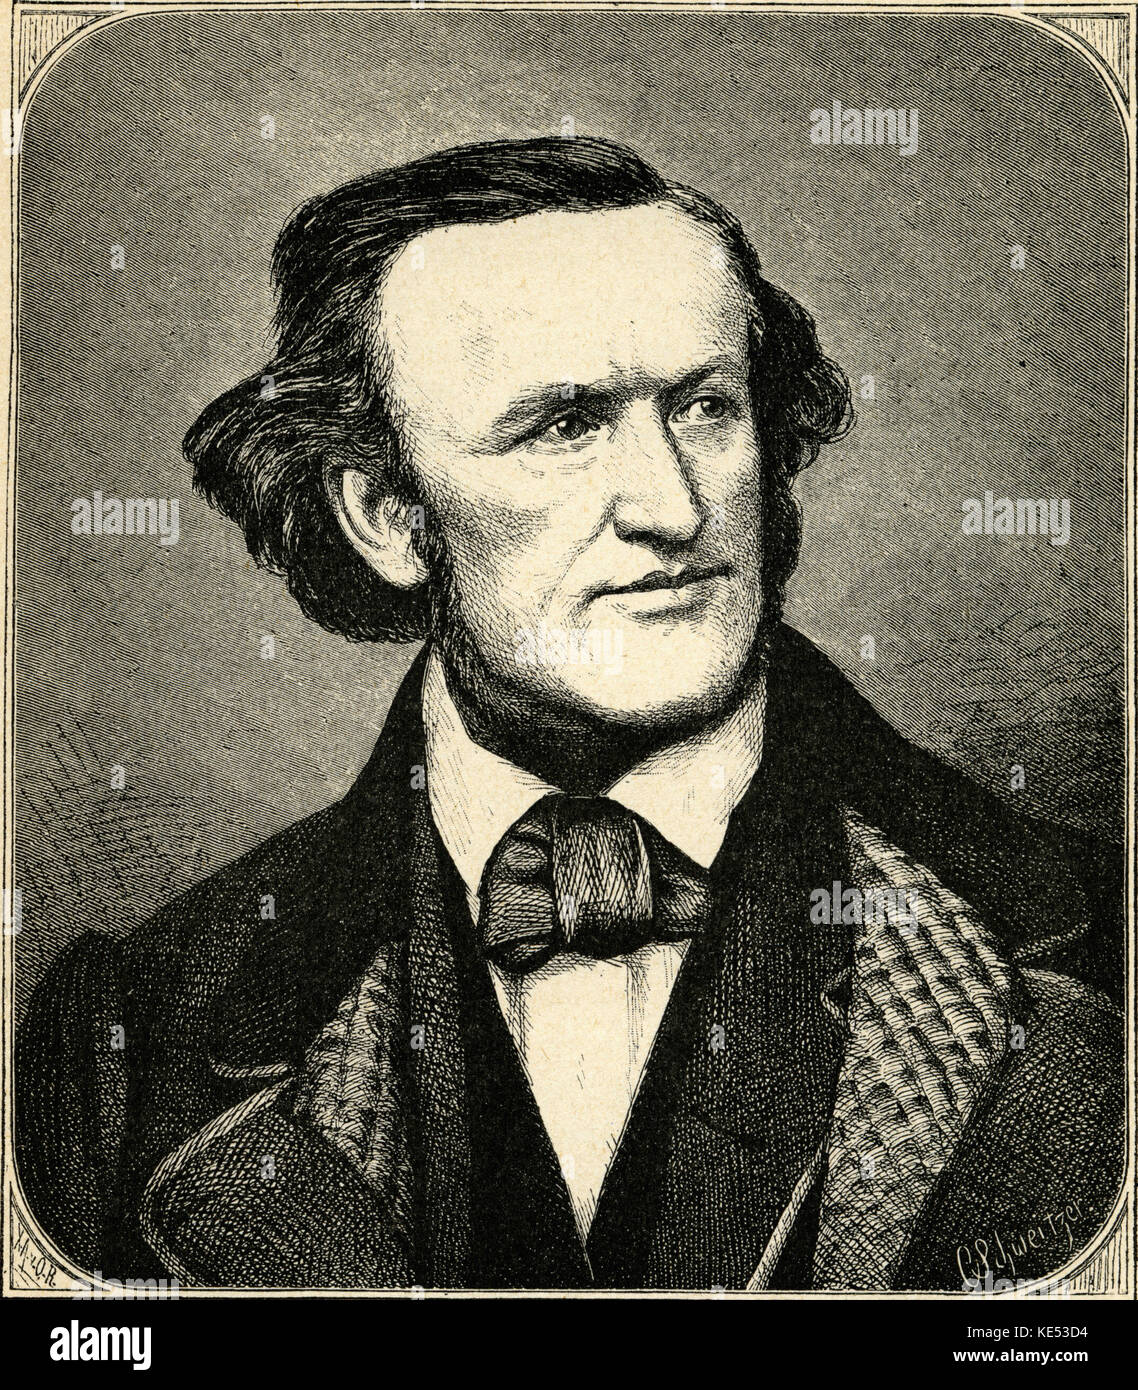 Richard Wagner, after an engraving by C.Schweitzer. German composer & author, 22 May 1813 - 13 February 1883. Stock Photo